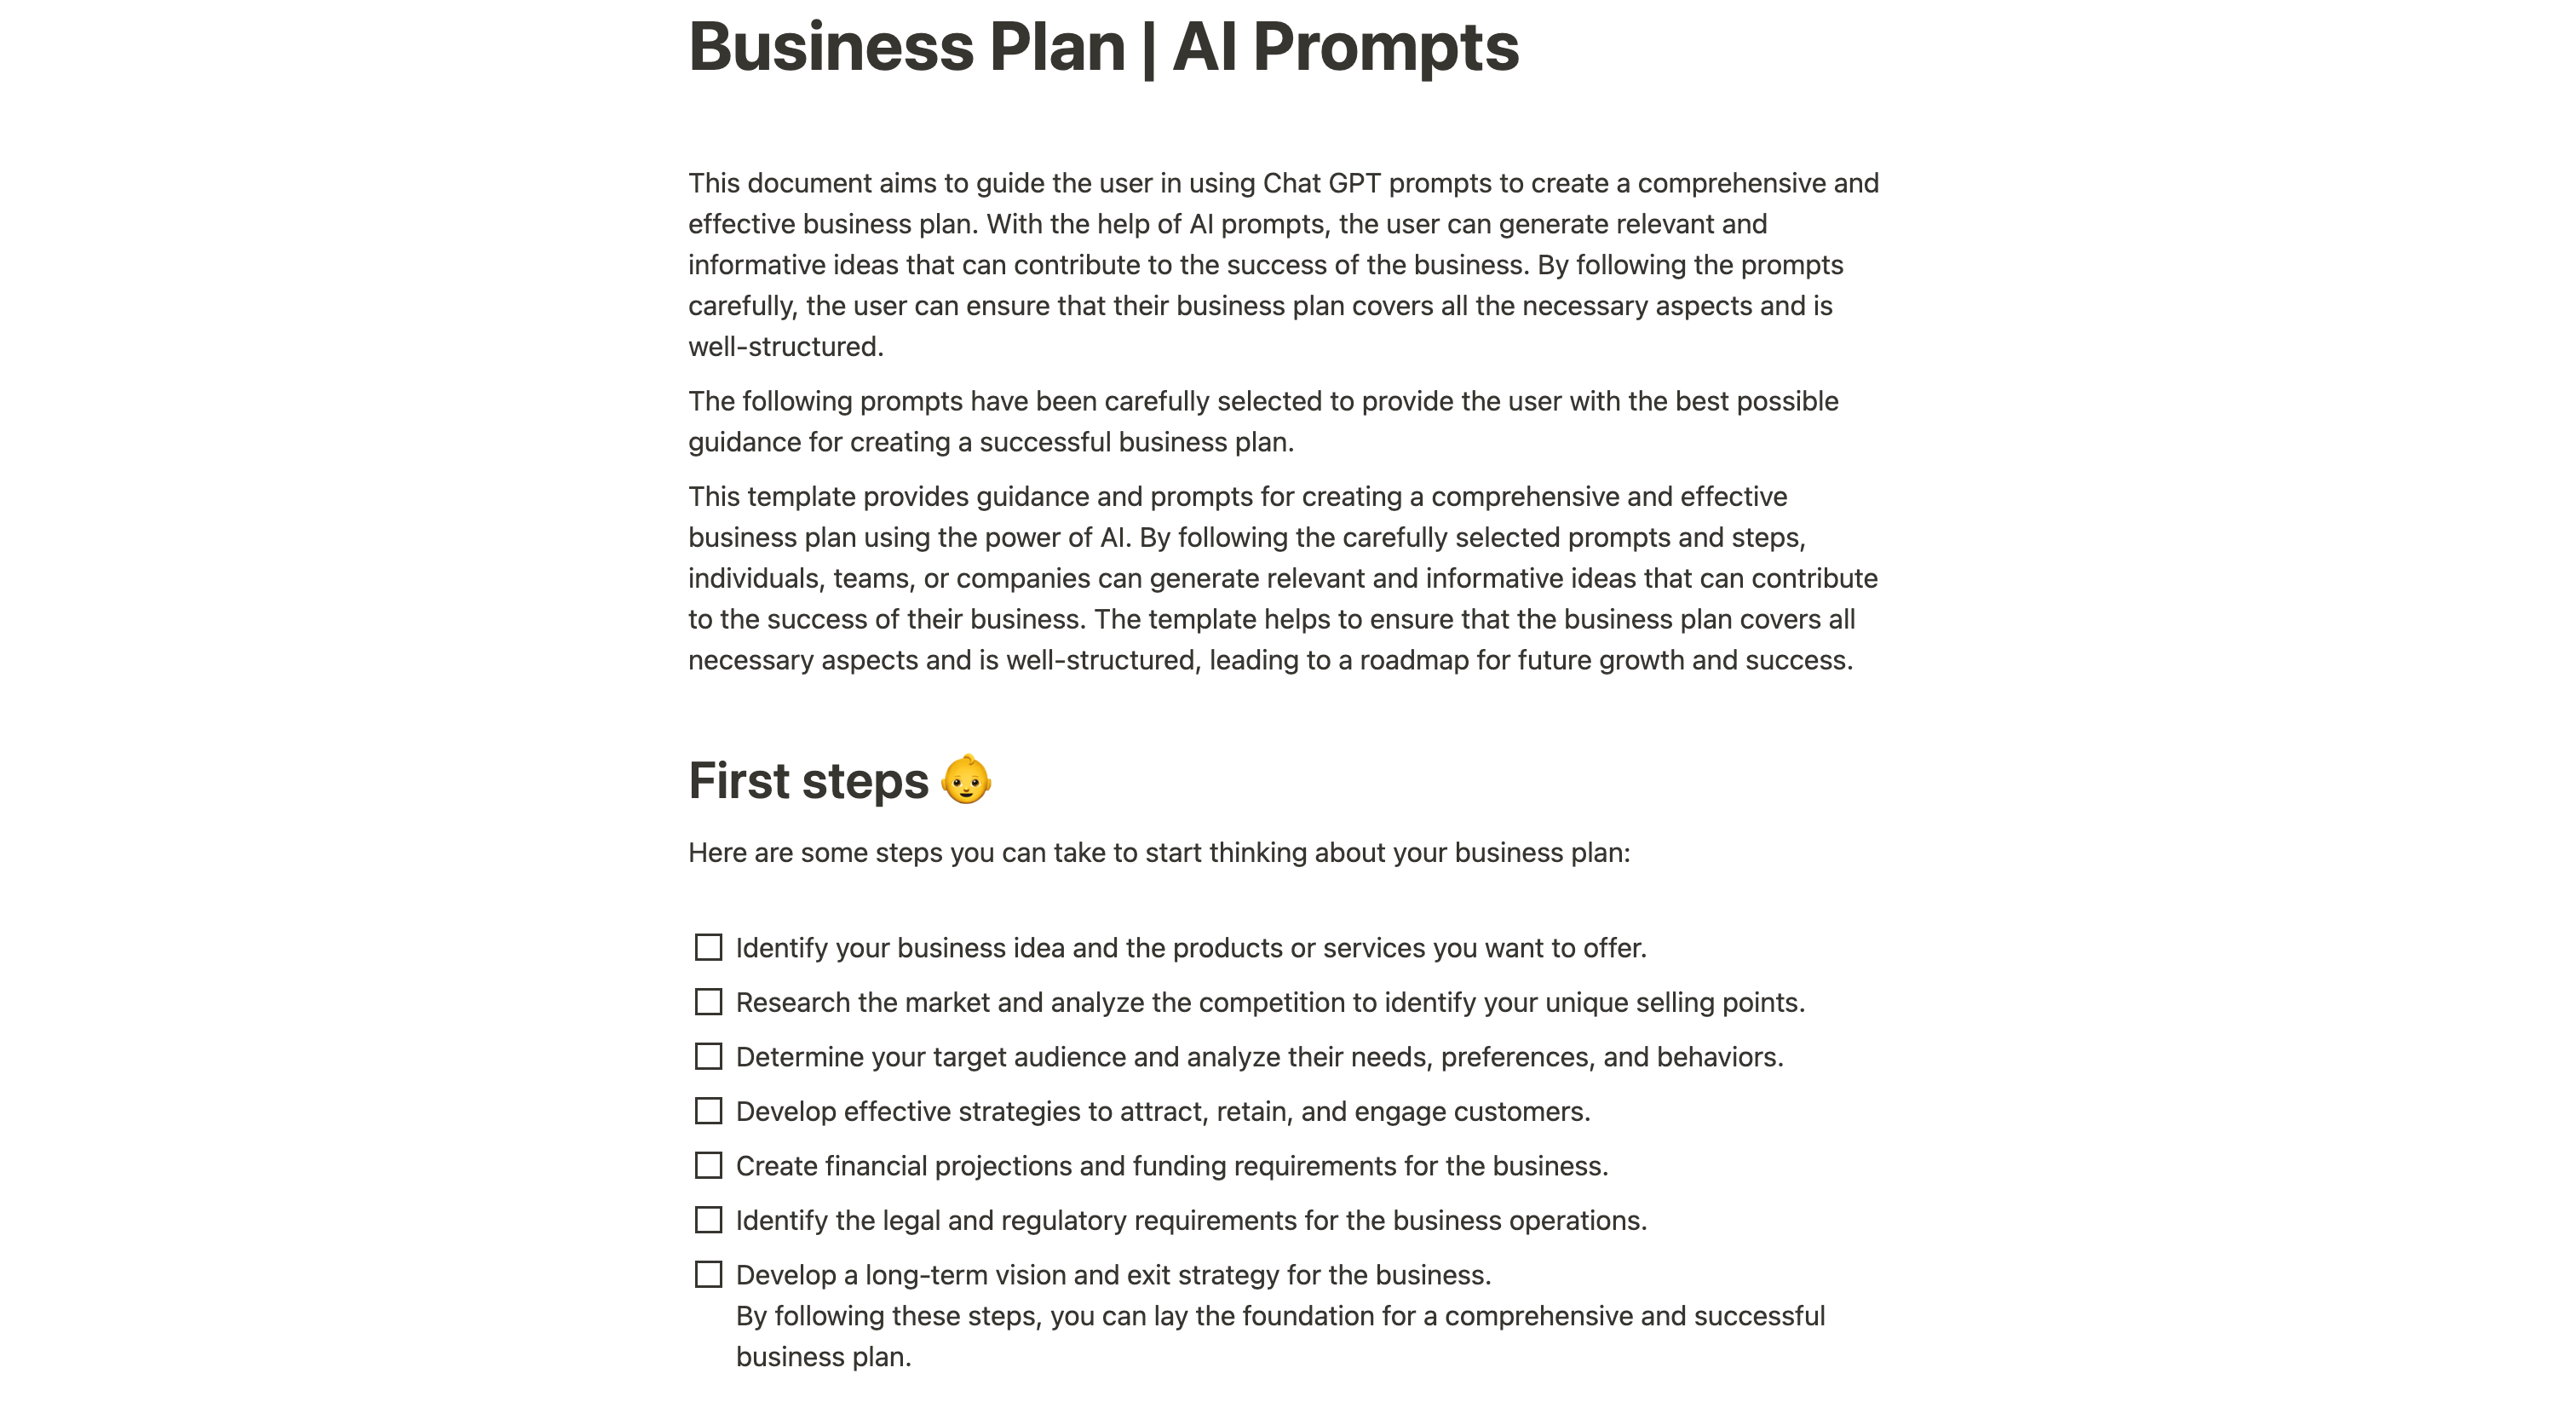 Business Plan AI Prompts template